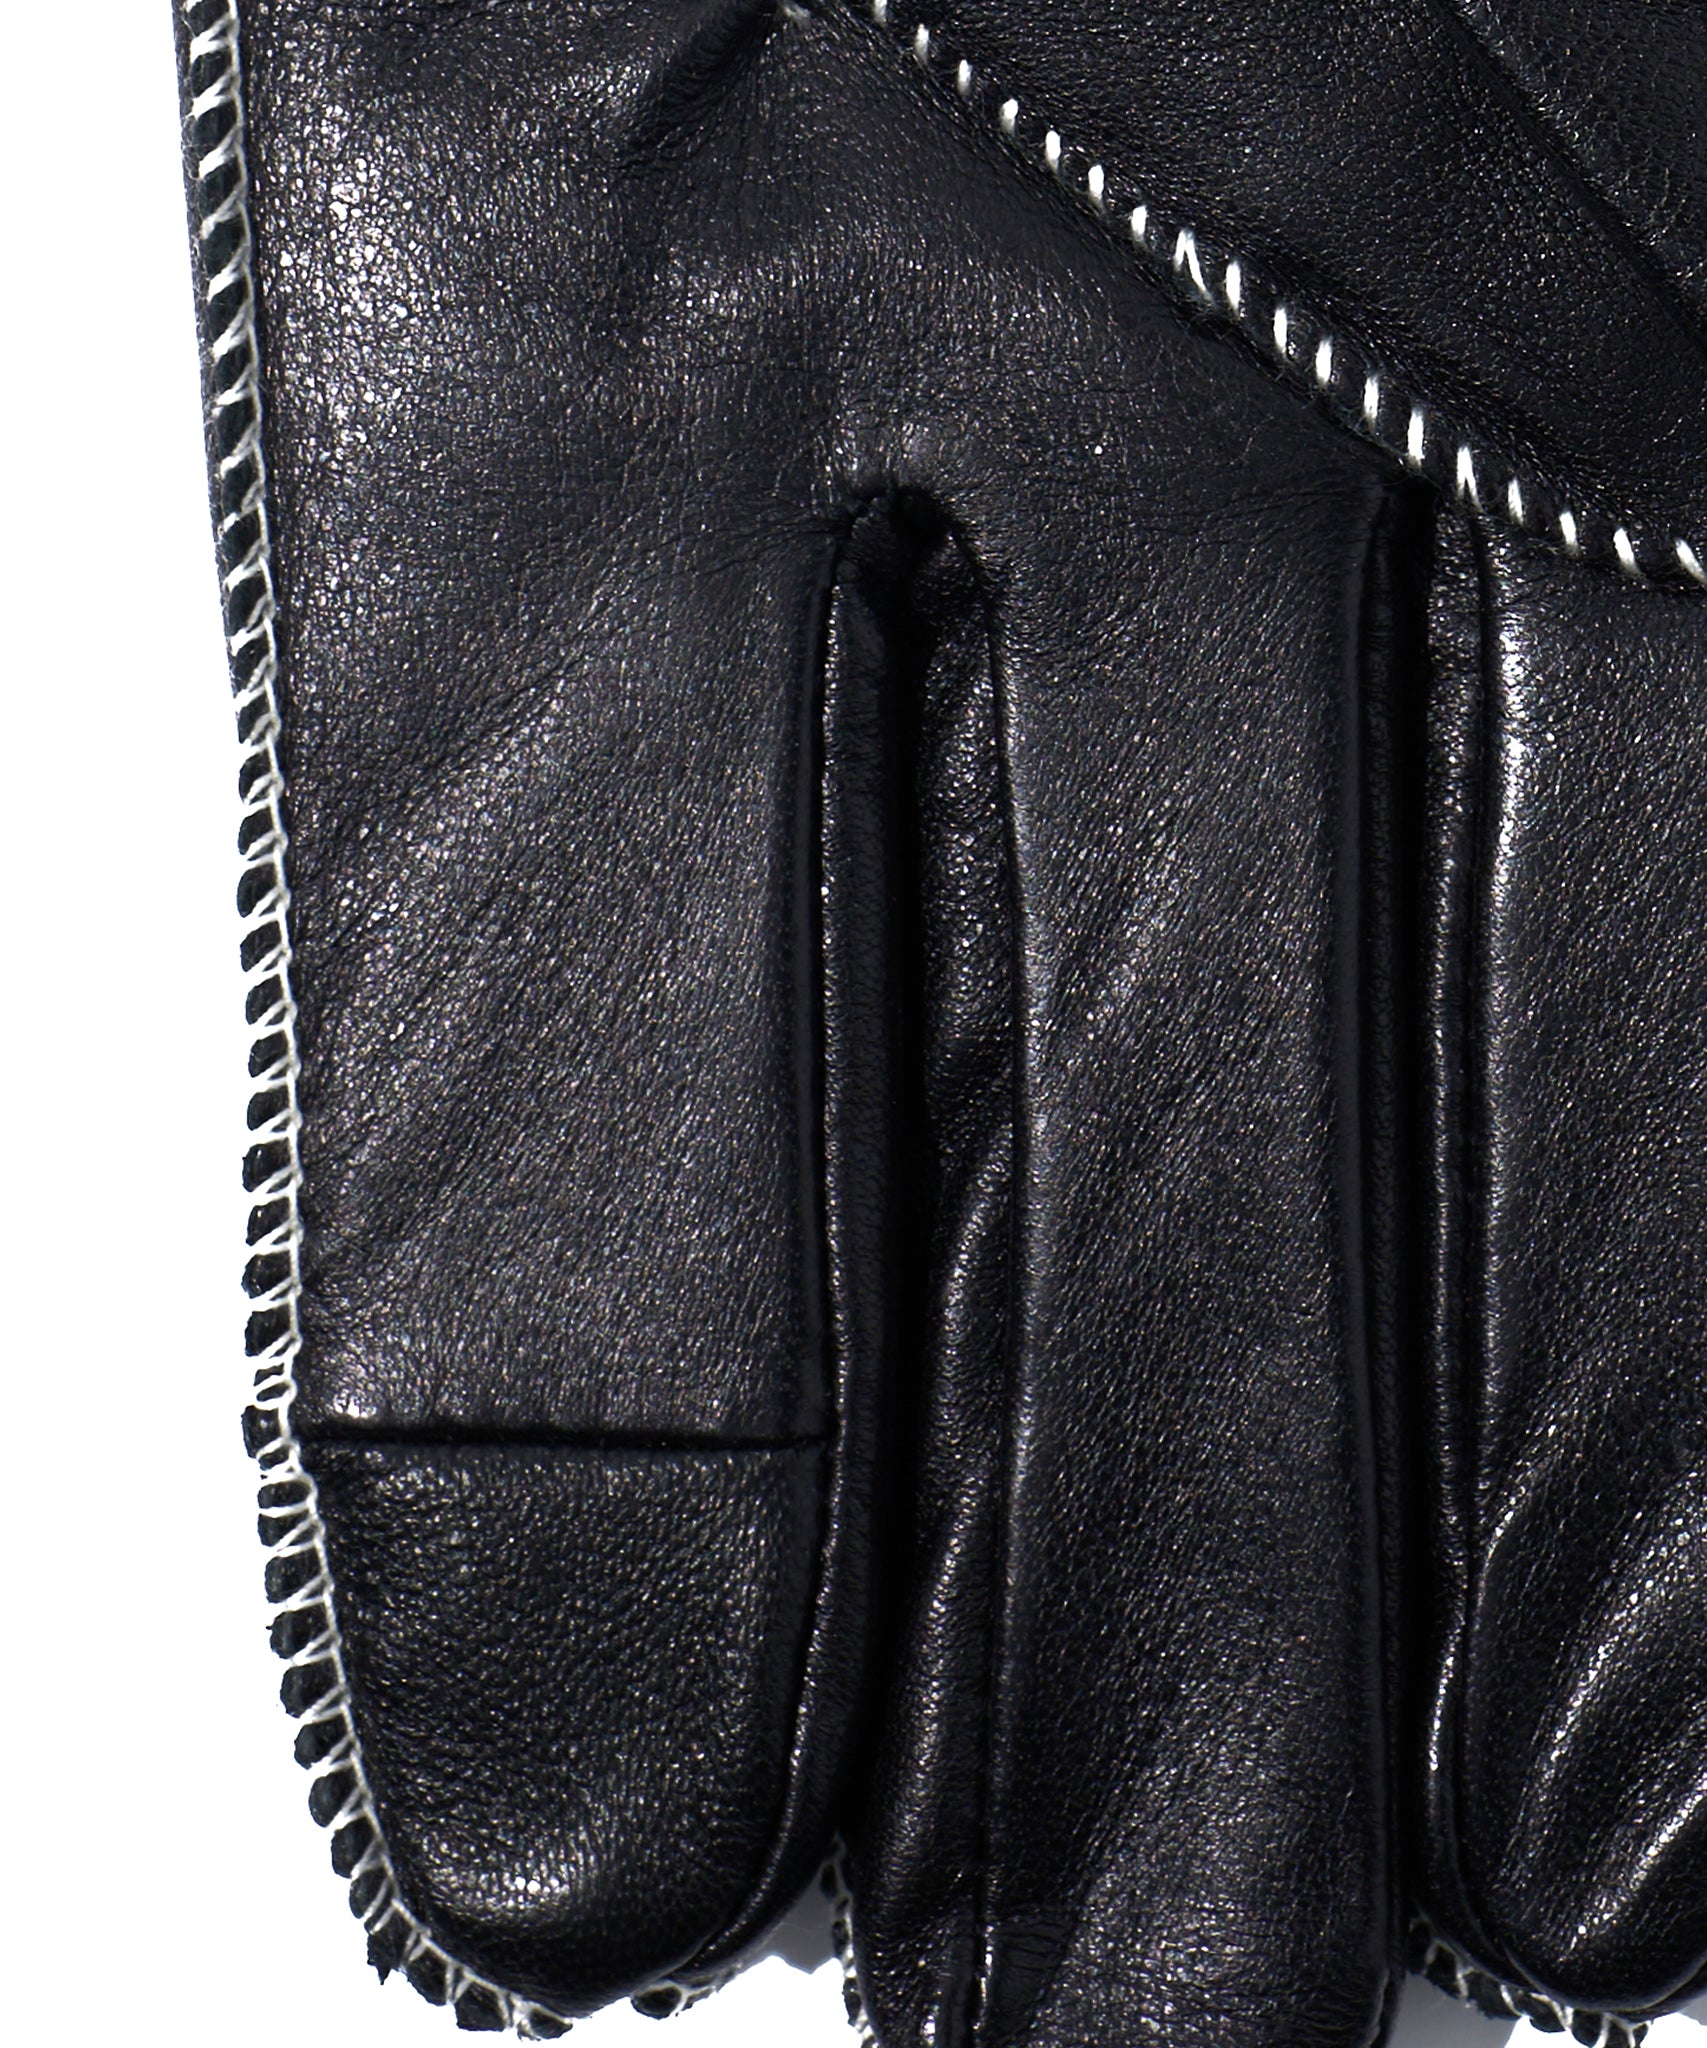 Stitched Leather Glove in color Black